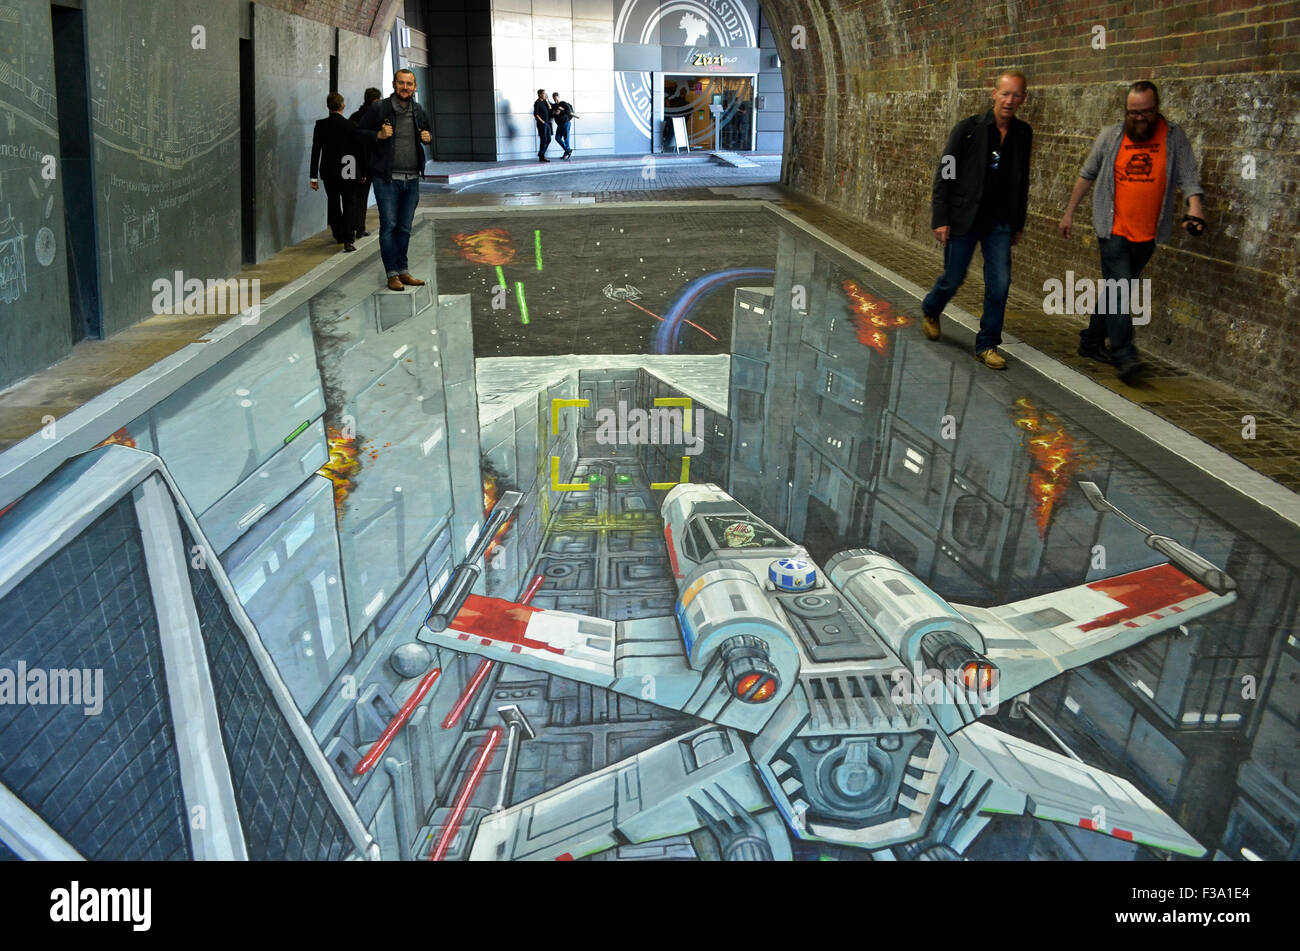 A 3-D Star Wars painting by Joe and Max which appeared in the pedestrian tunnel under Southwark Bridge, London, 1st-2nd October 2015, to coincide with the UK release of the Rise Against The Empire play set. The painting, which was 49 feet (15 metres) long, has both bemused wregular commuters and drawn crowds of tourists keen to see it throughout the two days, and shows the attack on the Death Star by Luke Skywalker's X-Wing with an Imperial TIE Fighter in pursuit to the left. Credit:  Antony Nettle/Alamy Live News Stock Photo